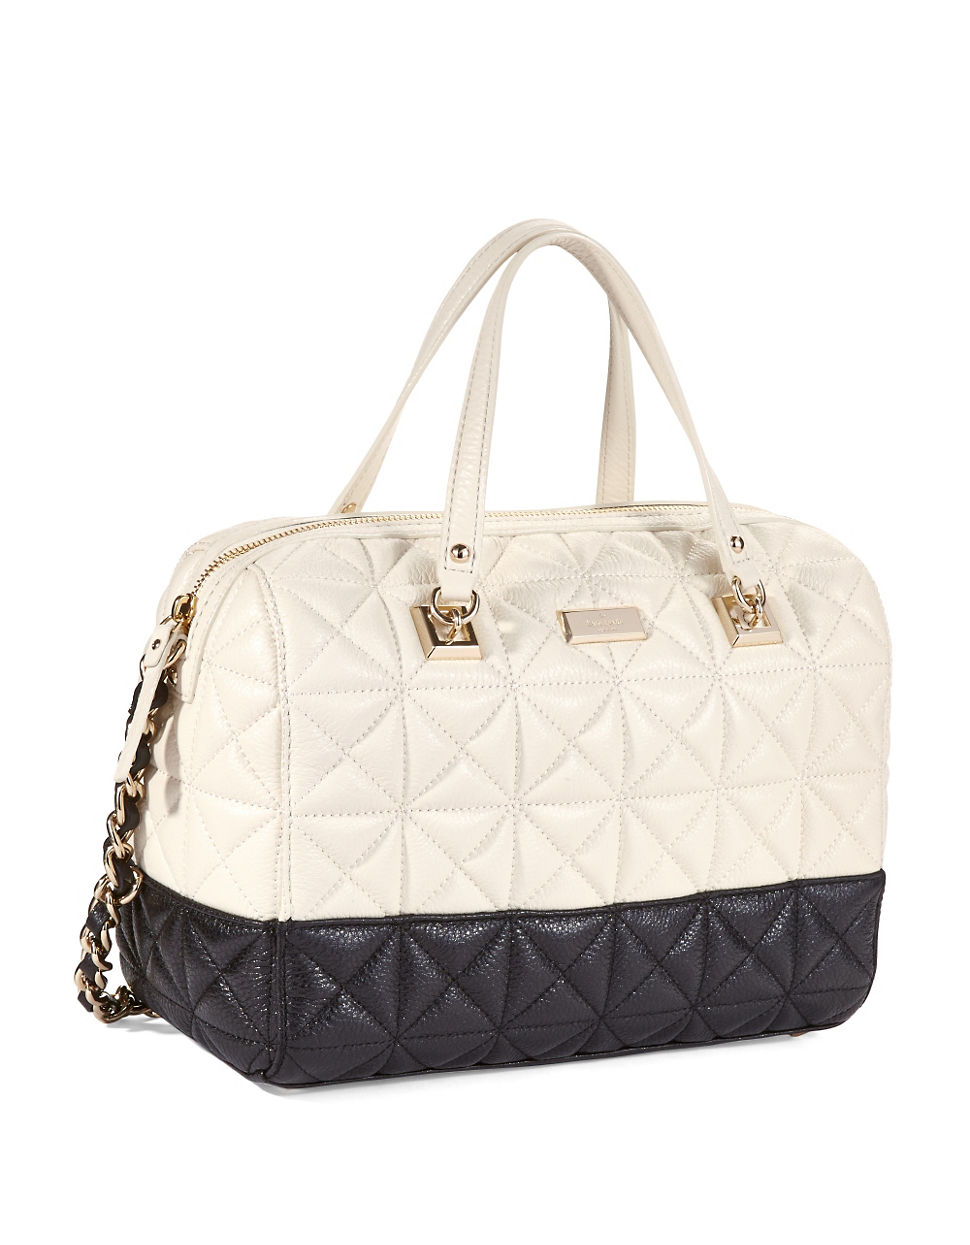 Kate Spade Quilted Leather Handbag in White | Lyst